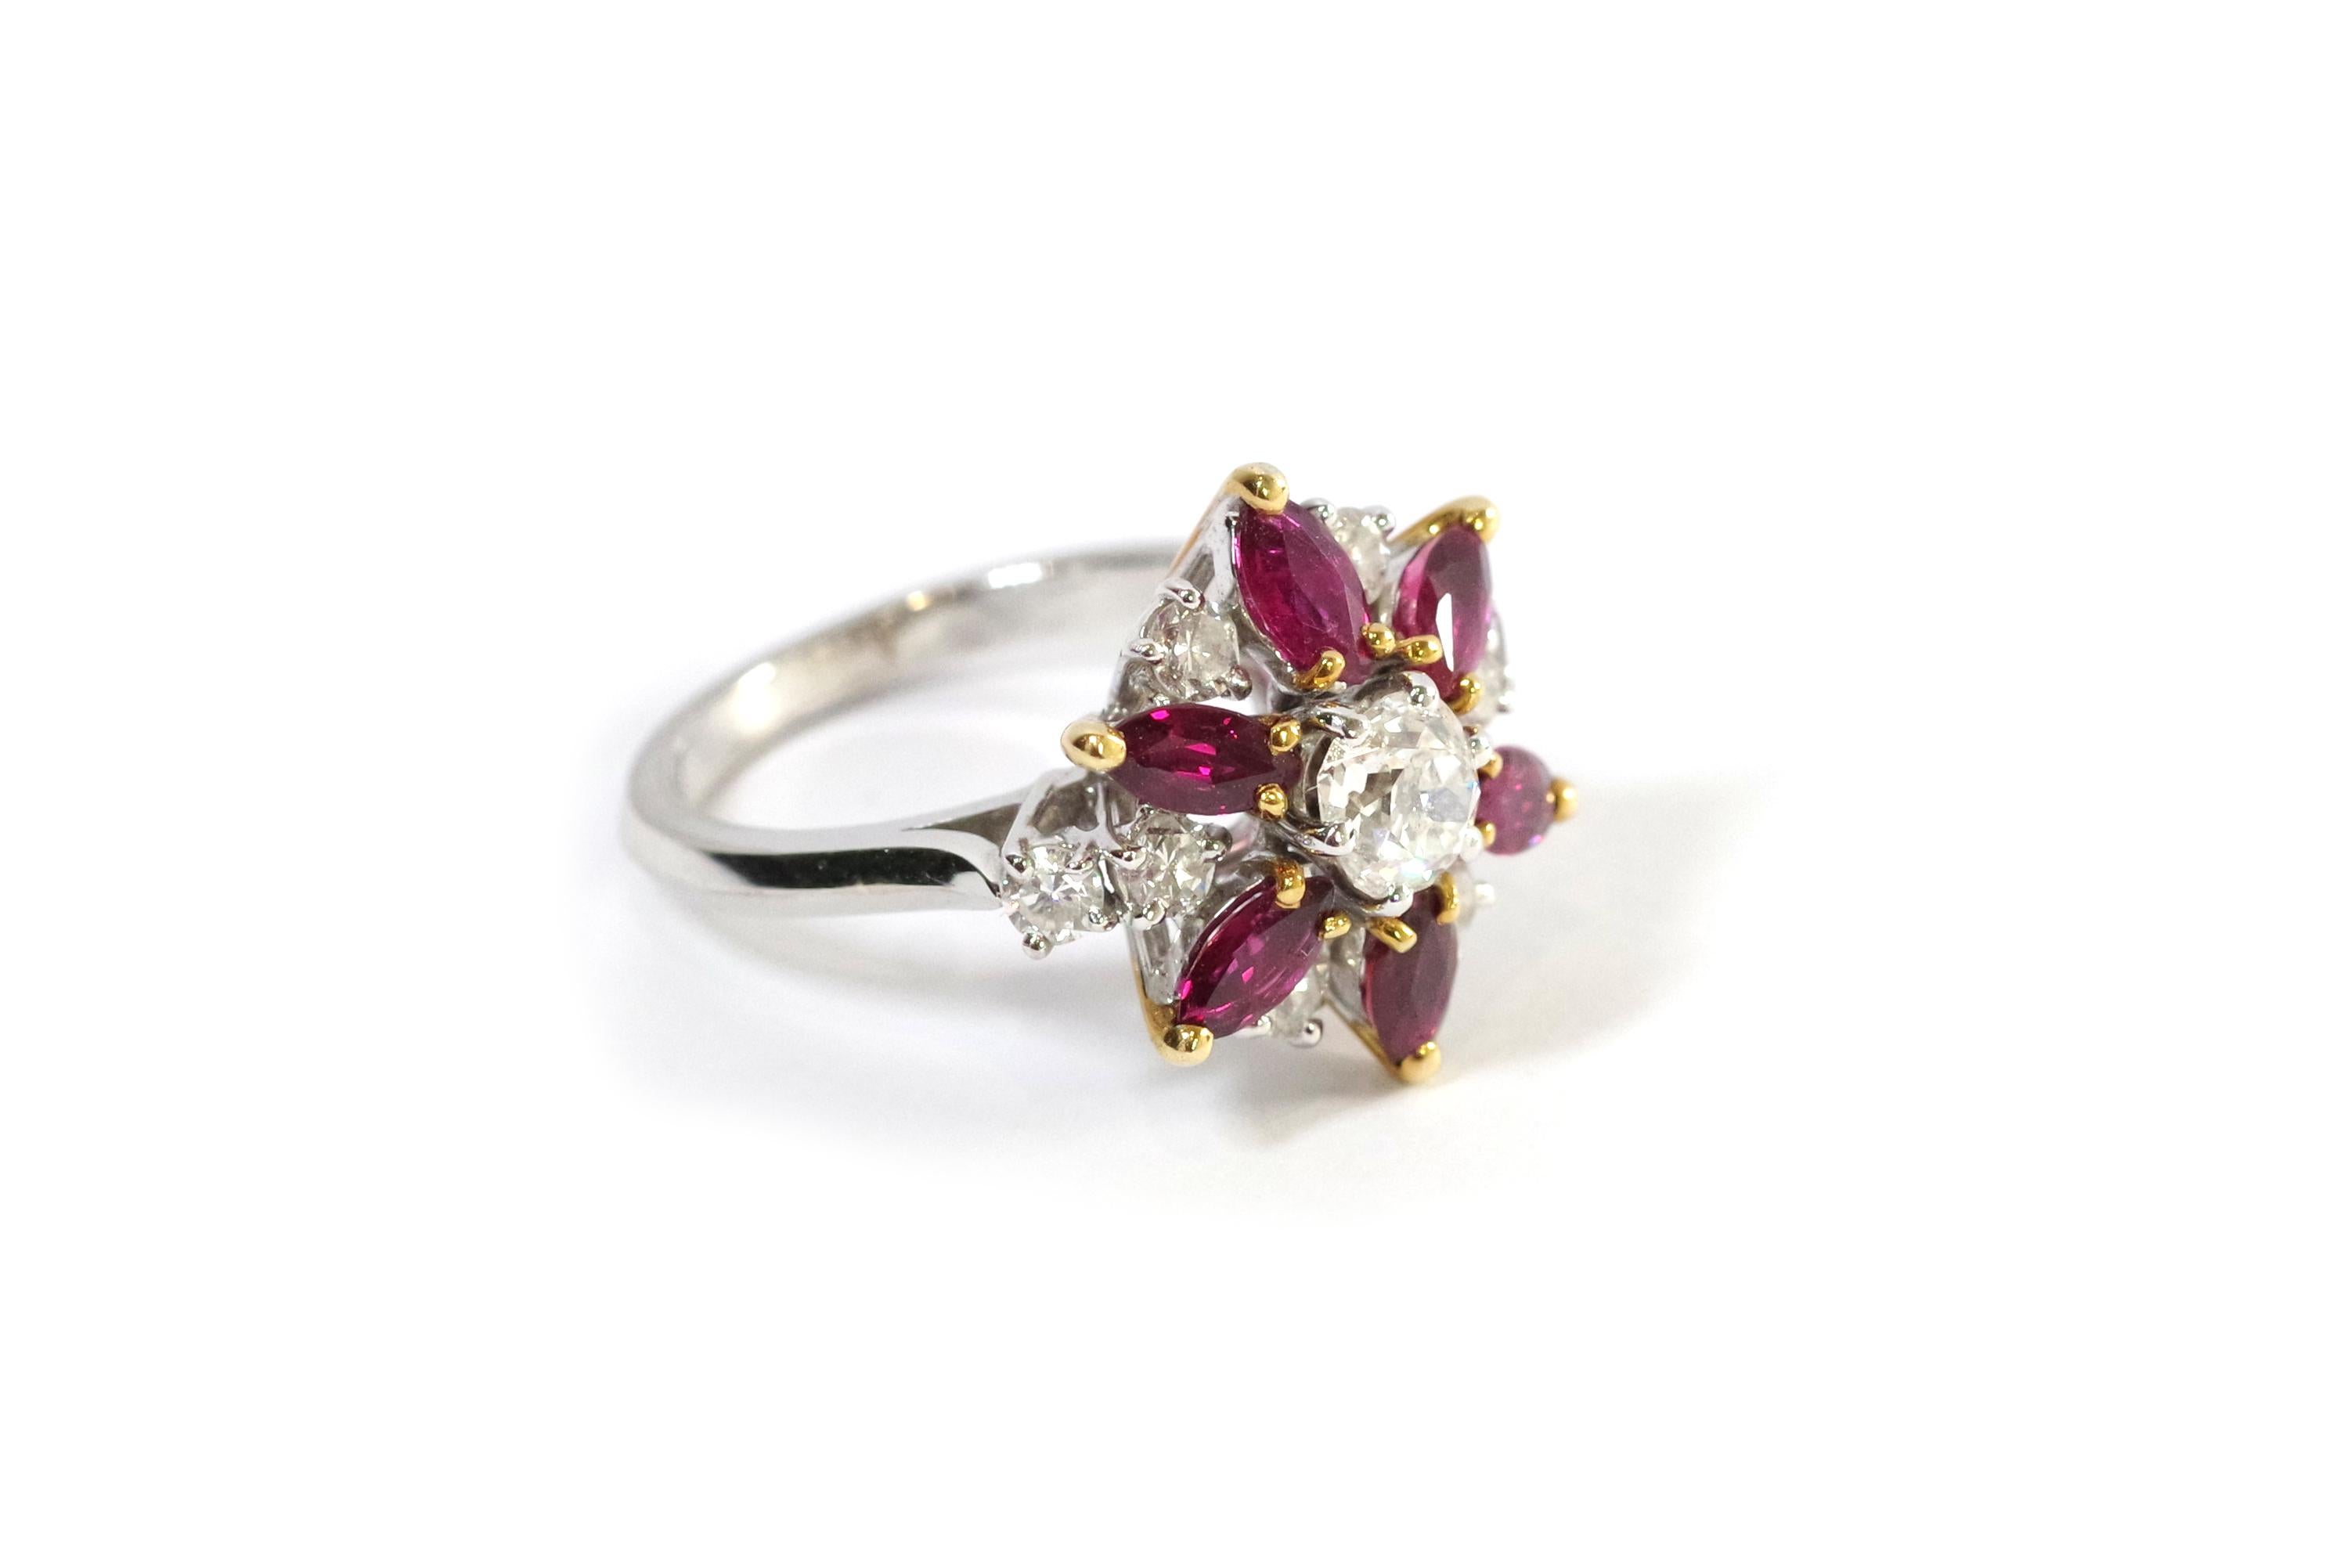 Marguerite diamond ruby ring in 18-karat white gold. The ring features a central significant old mine-cut diamond weighing approximately 0.33 carats. The diamond is surrounded by six marquise-shaped rubies and four brilliant-cut diamonds. The rubies